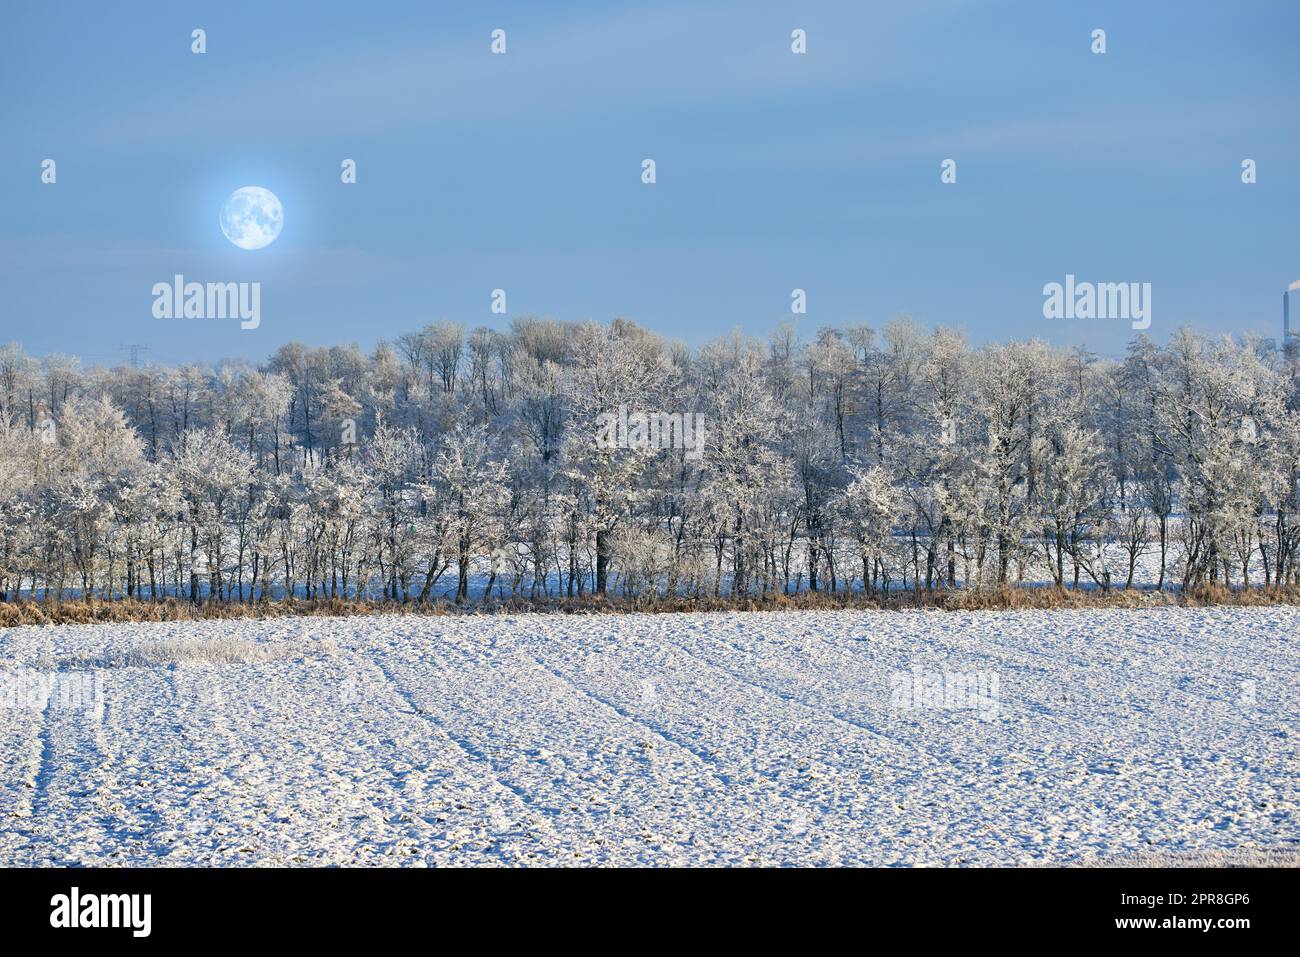 Tall trees on an open field during winter on a cold moonlit night. Large woods surrounded by snow covered land, grass and foliage. Landscape of nature thriving and growing through the icy season Stock Photo